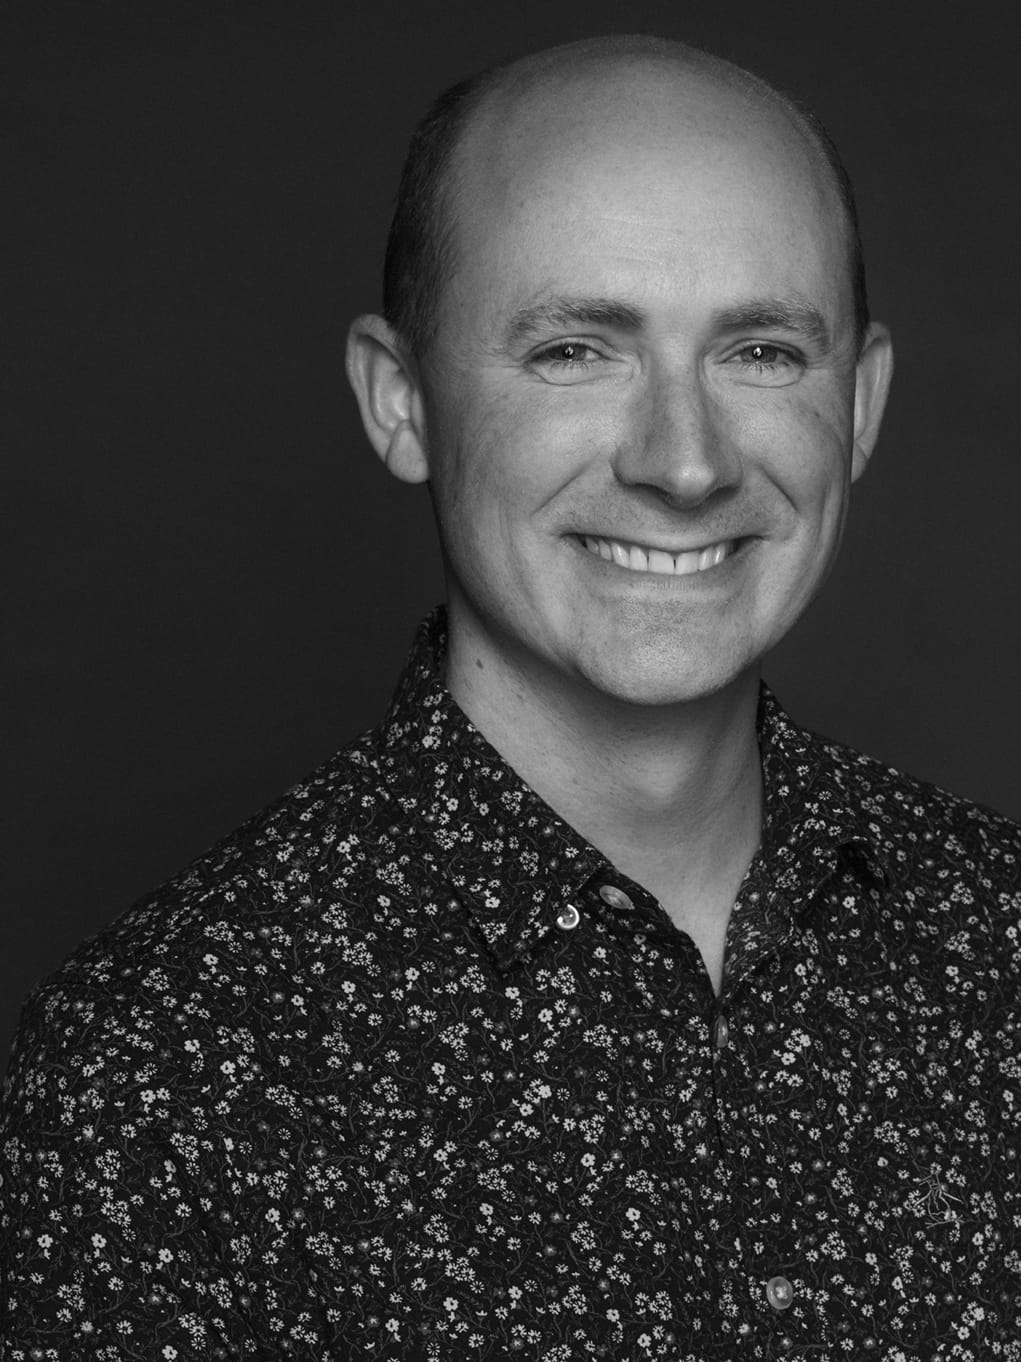 Kevin, a white man, is stood infront of a grey backdrop. The photo is in black and white. He smiles a wide smile, and is wearing a black button-up shirt with small white flowers detailed on it.